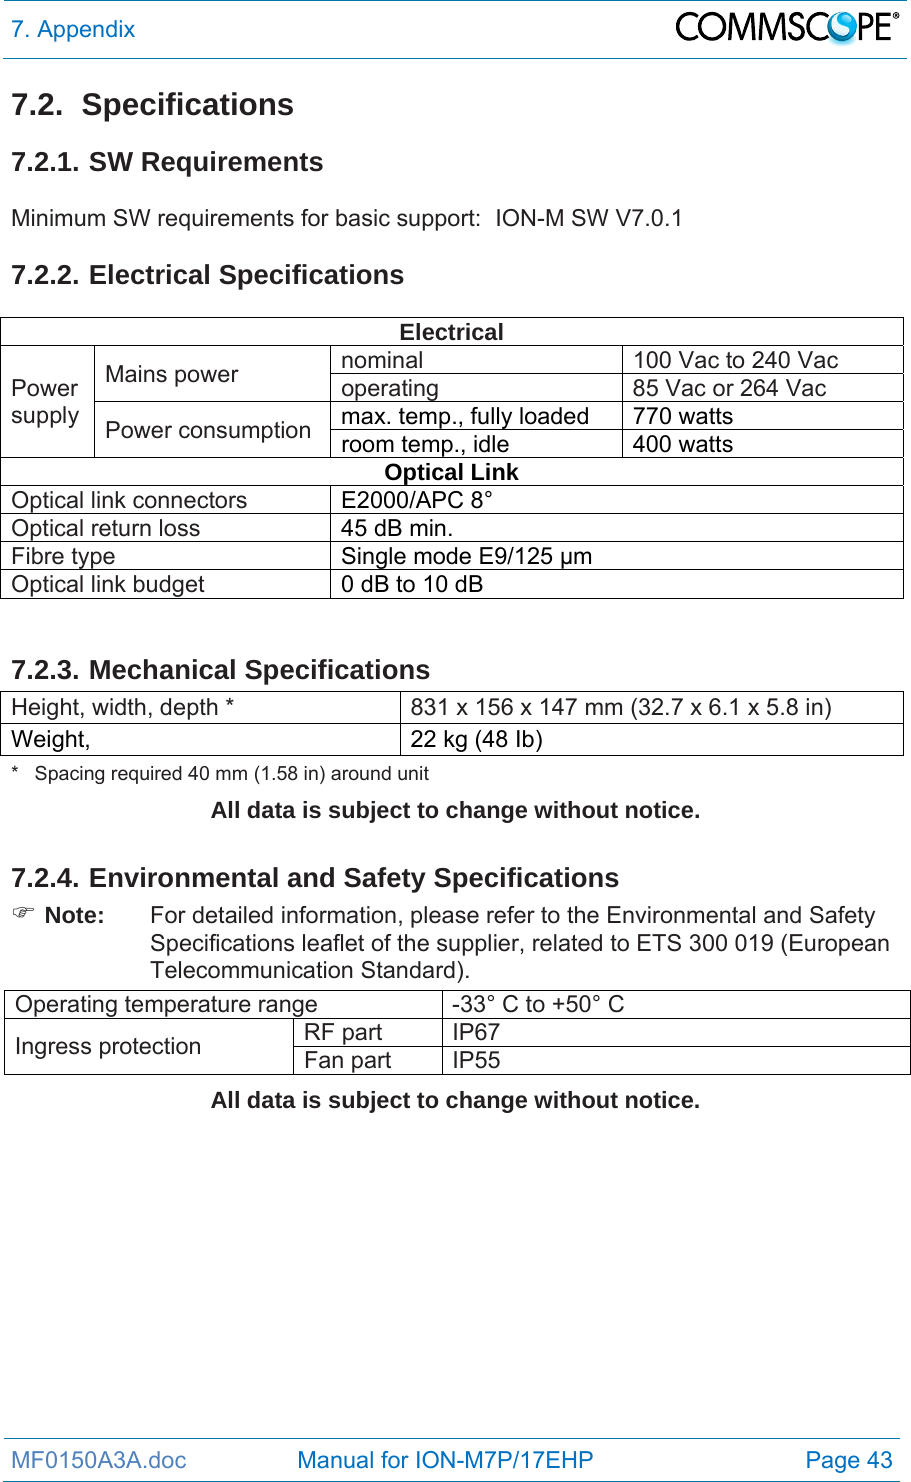 7. Appendix  MF0150A3A.doc                 Manual for ION-M7P/17EHP  Page 43 7.2. Specifications 7.2.1. SW Requirements  Minimum SW requirements for basic support:  ION-M SW V7.0.1   7.2.2. Electrical Specifications  Electrical Power supply Mains power  nominal  100 Vac to 240 Vac operating  85 Vac or 264 Vac Power consumption  max. temp., fully loaded  770 watts room temp., idle  400 watts Optical Link Optical link connectors  E2000/APC 8° Optical return loss  45 dB min. Fibre type  Single mode E9/125 µm Optical link budget  0 dB to 10 dB  7.2.3. Mechanical Specifications Height, width, depth *  831 x 156 x 147 mm (32.7 x 6.1 x 5.8 in) Weight,   22 kg (48 Ib) *   Spacing required 40 mm (1.58 in) around unit All data is subject to change without notice.  7.2.4. Environmental and Safety Specifications   Note:  For detailed information, please refer to the Environmental and Safety Specifications leaflet of the supplier, related to ETS 300 019 (European Telecommunication Standard). Operating temperature range  -33° C to +50° C  Ingress protection  RF part  IP67 Fan part  IP55 All data is subject to change without notice. 